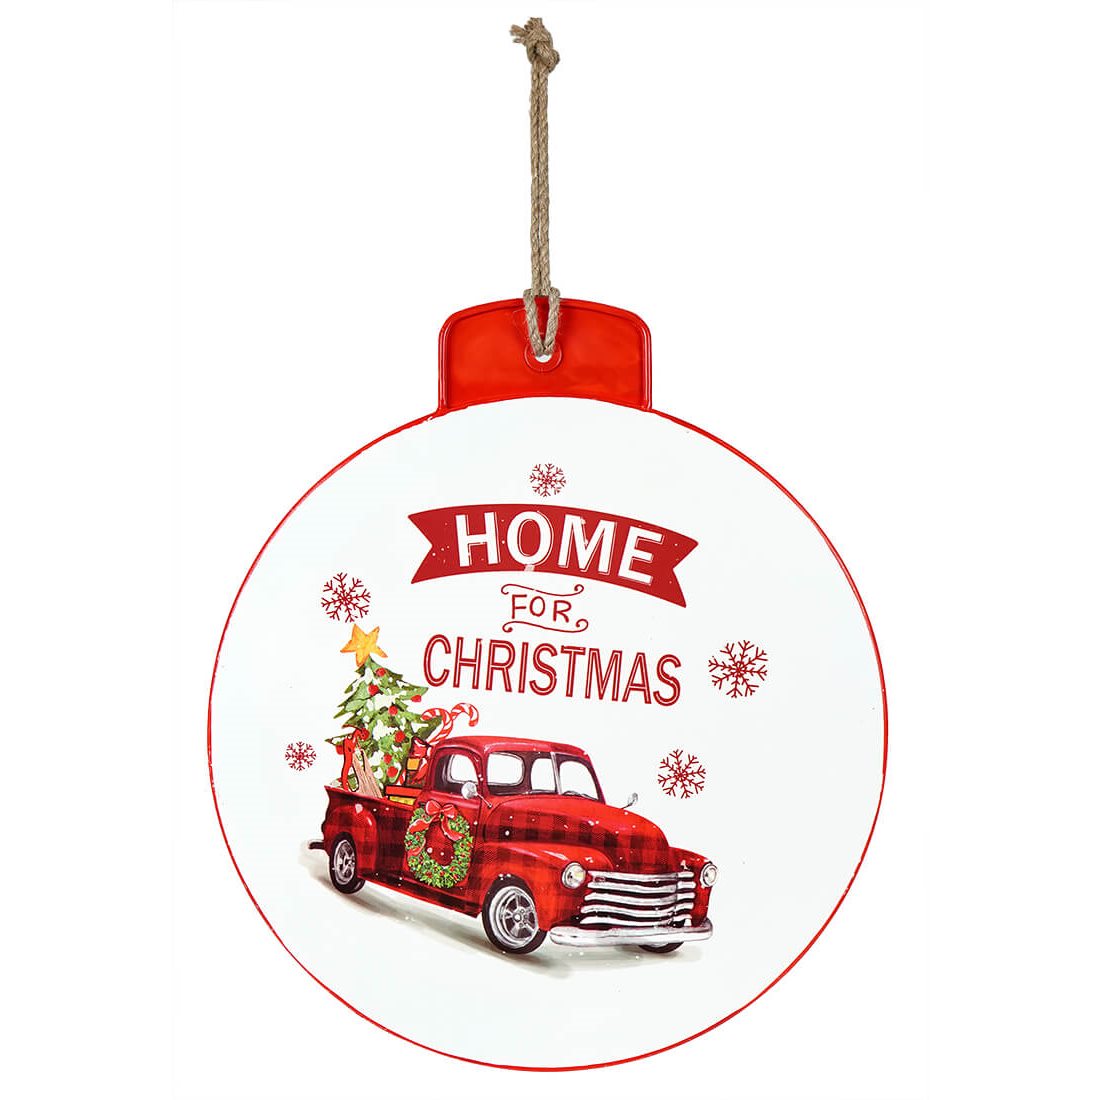 Home for Christmas Hanging Ornament Sign